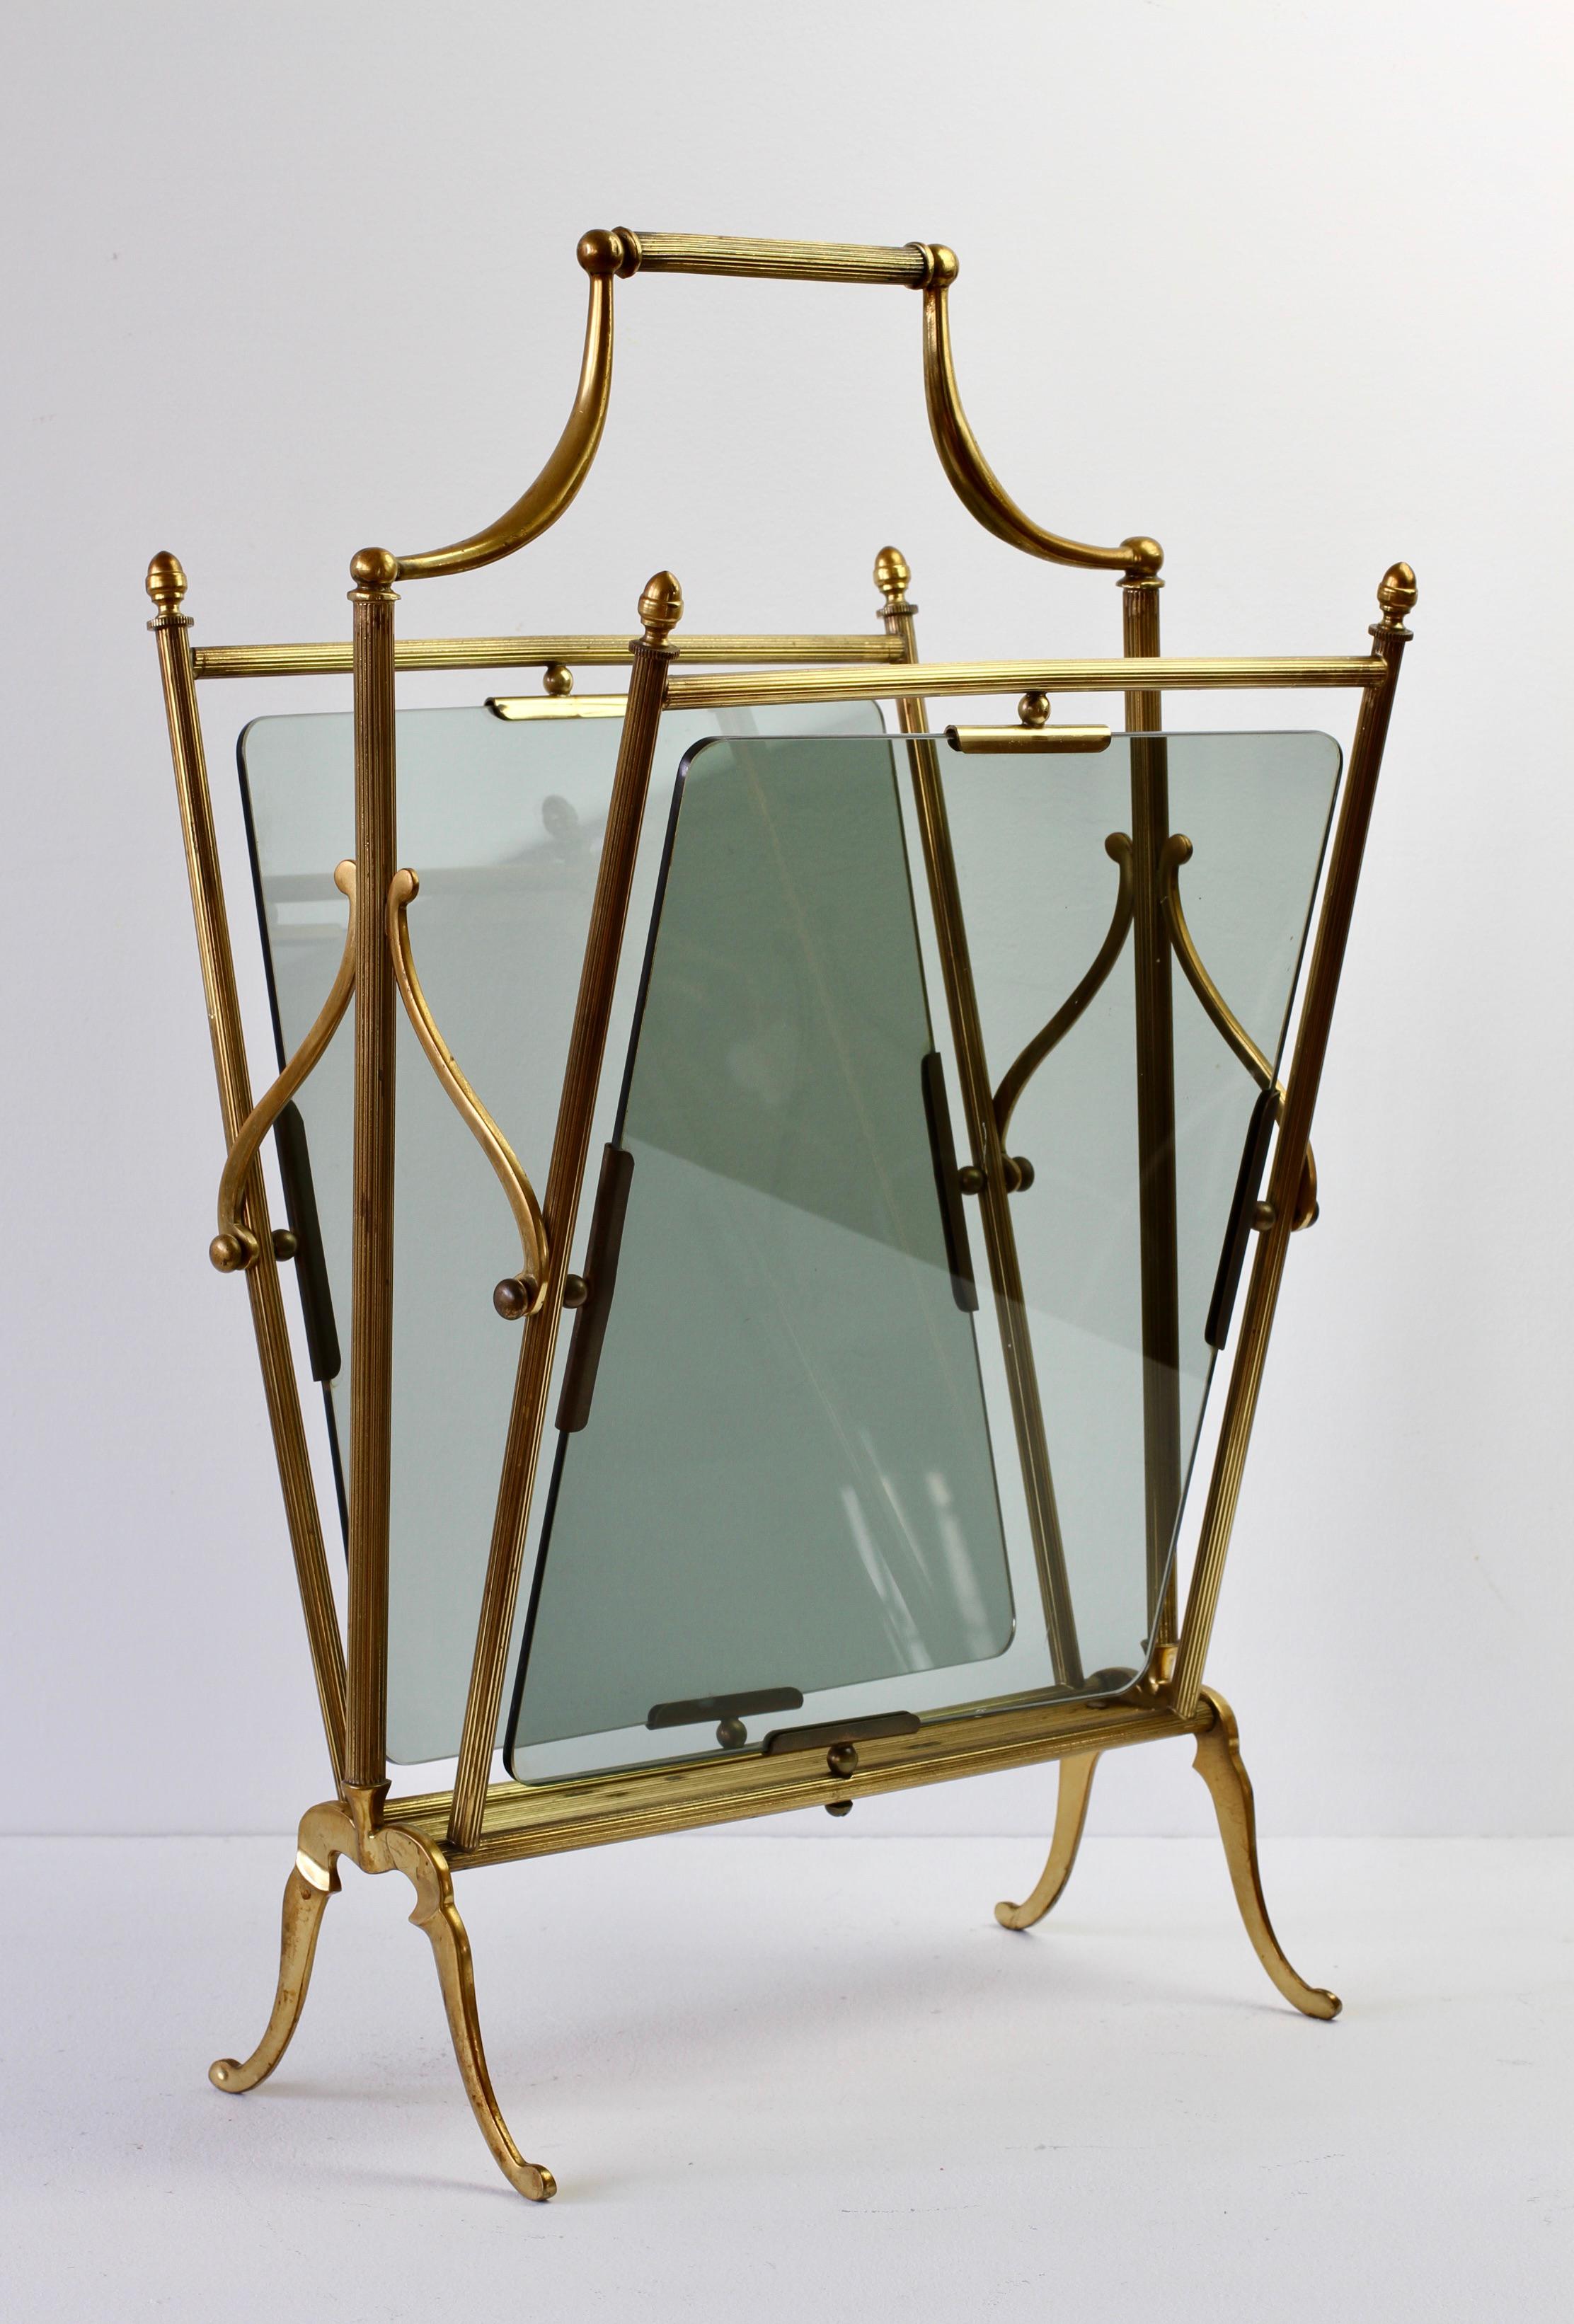 20th Century Maison Baguès ‘Attributed' Brass & Toned Glass Magazine Rack / Newspaper Stand For Sale